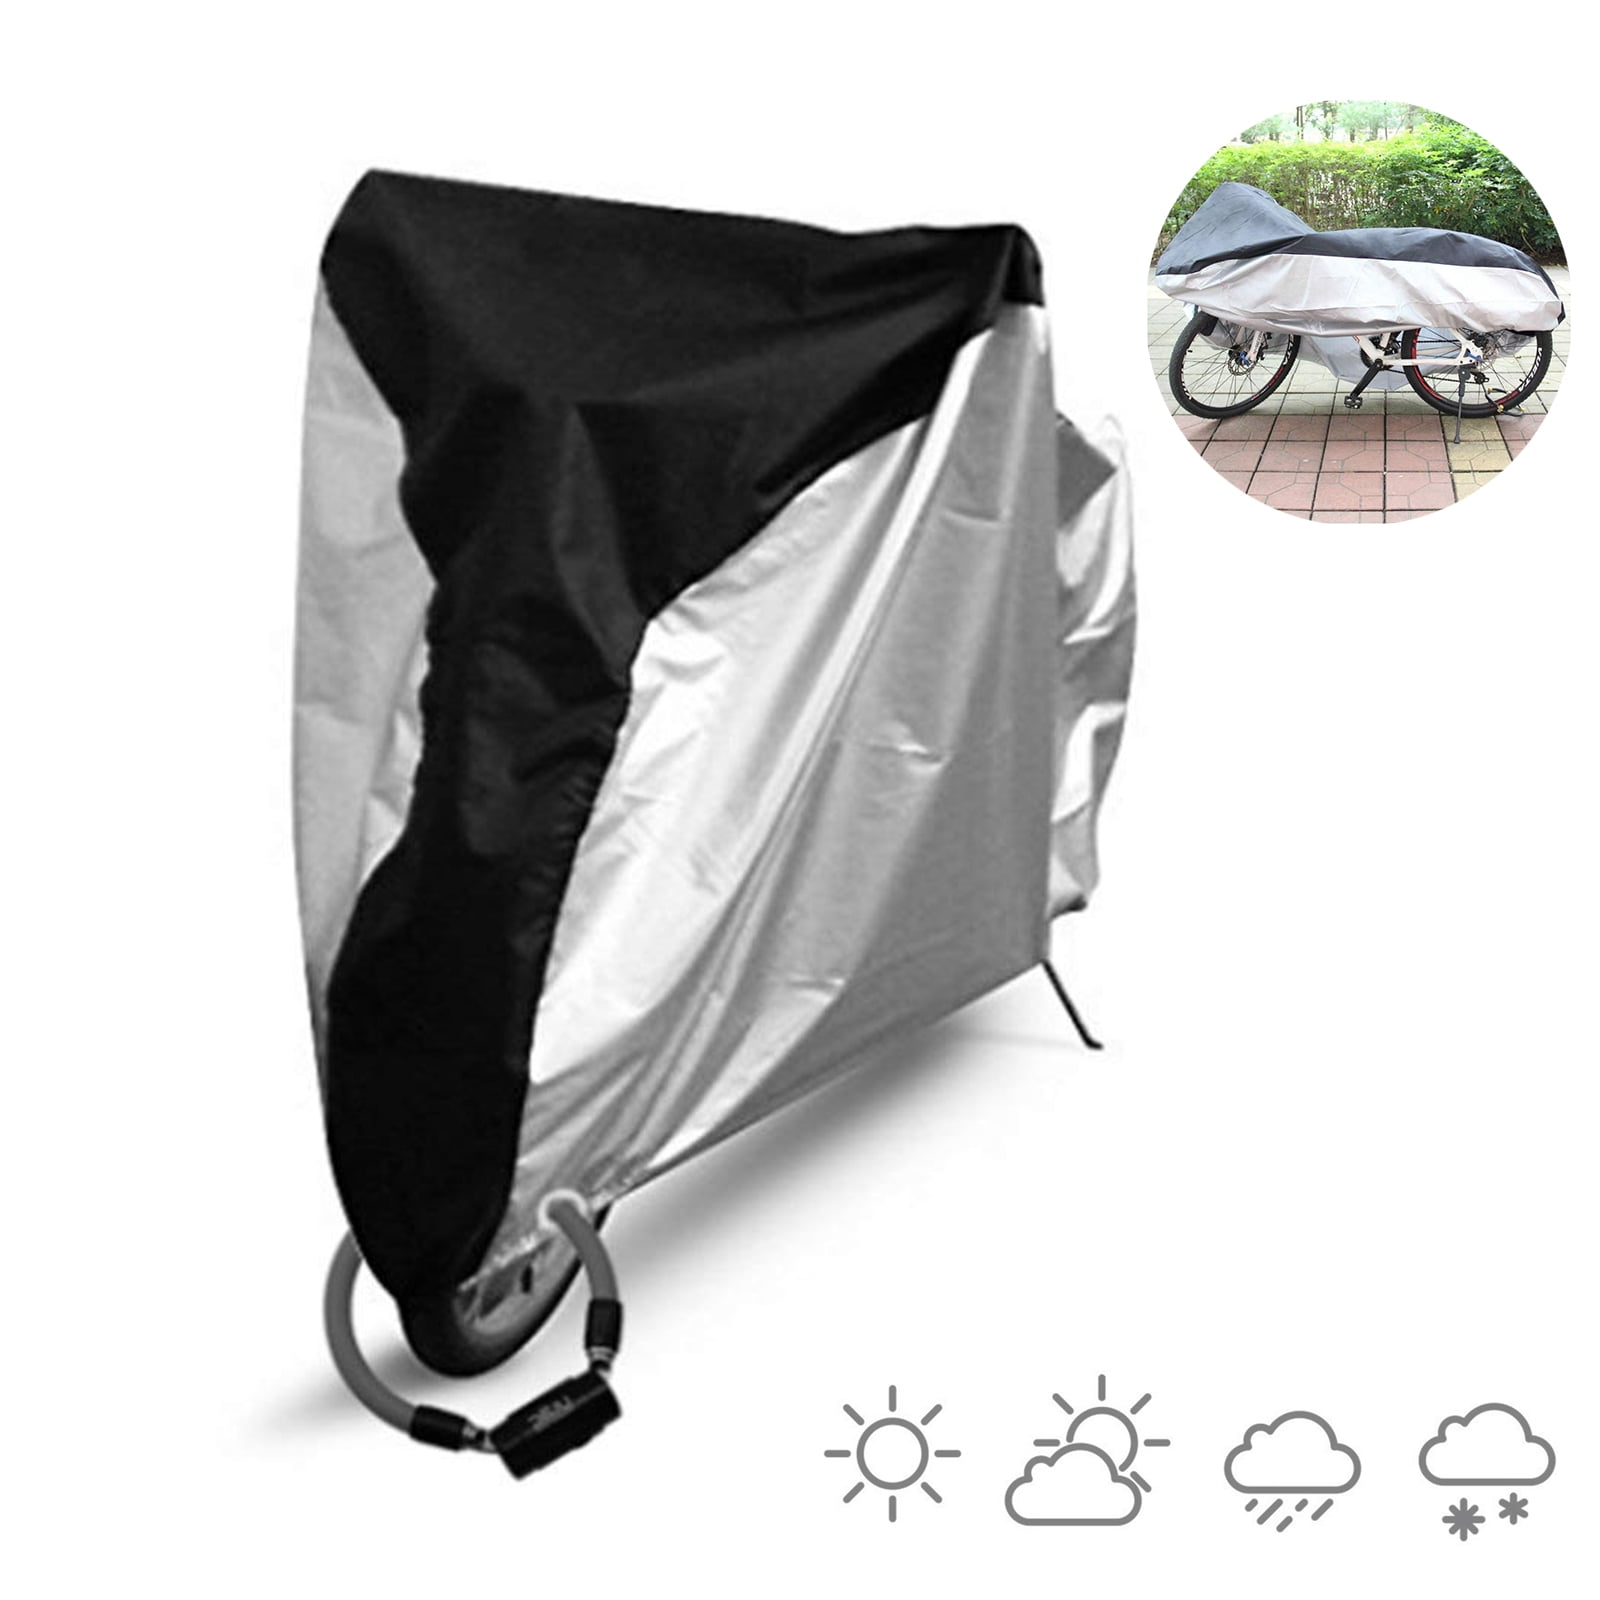 Details about   Bike Cover Outdoor Waterproof Bicycle Covers Rain Sun Dust Wind Proof Lock Hole